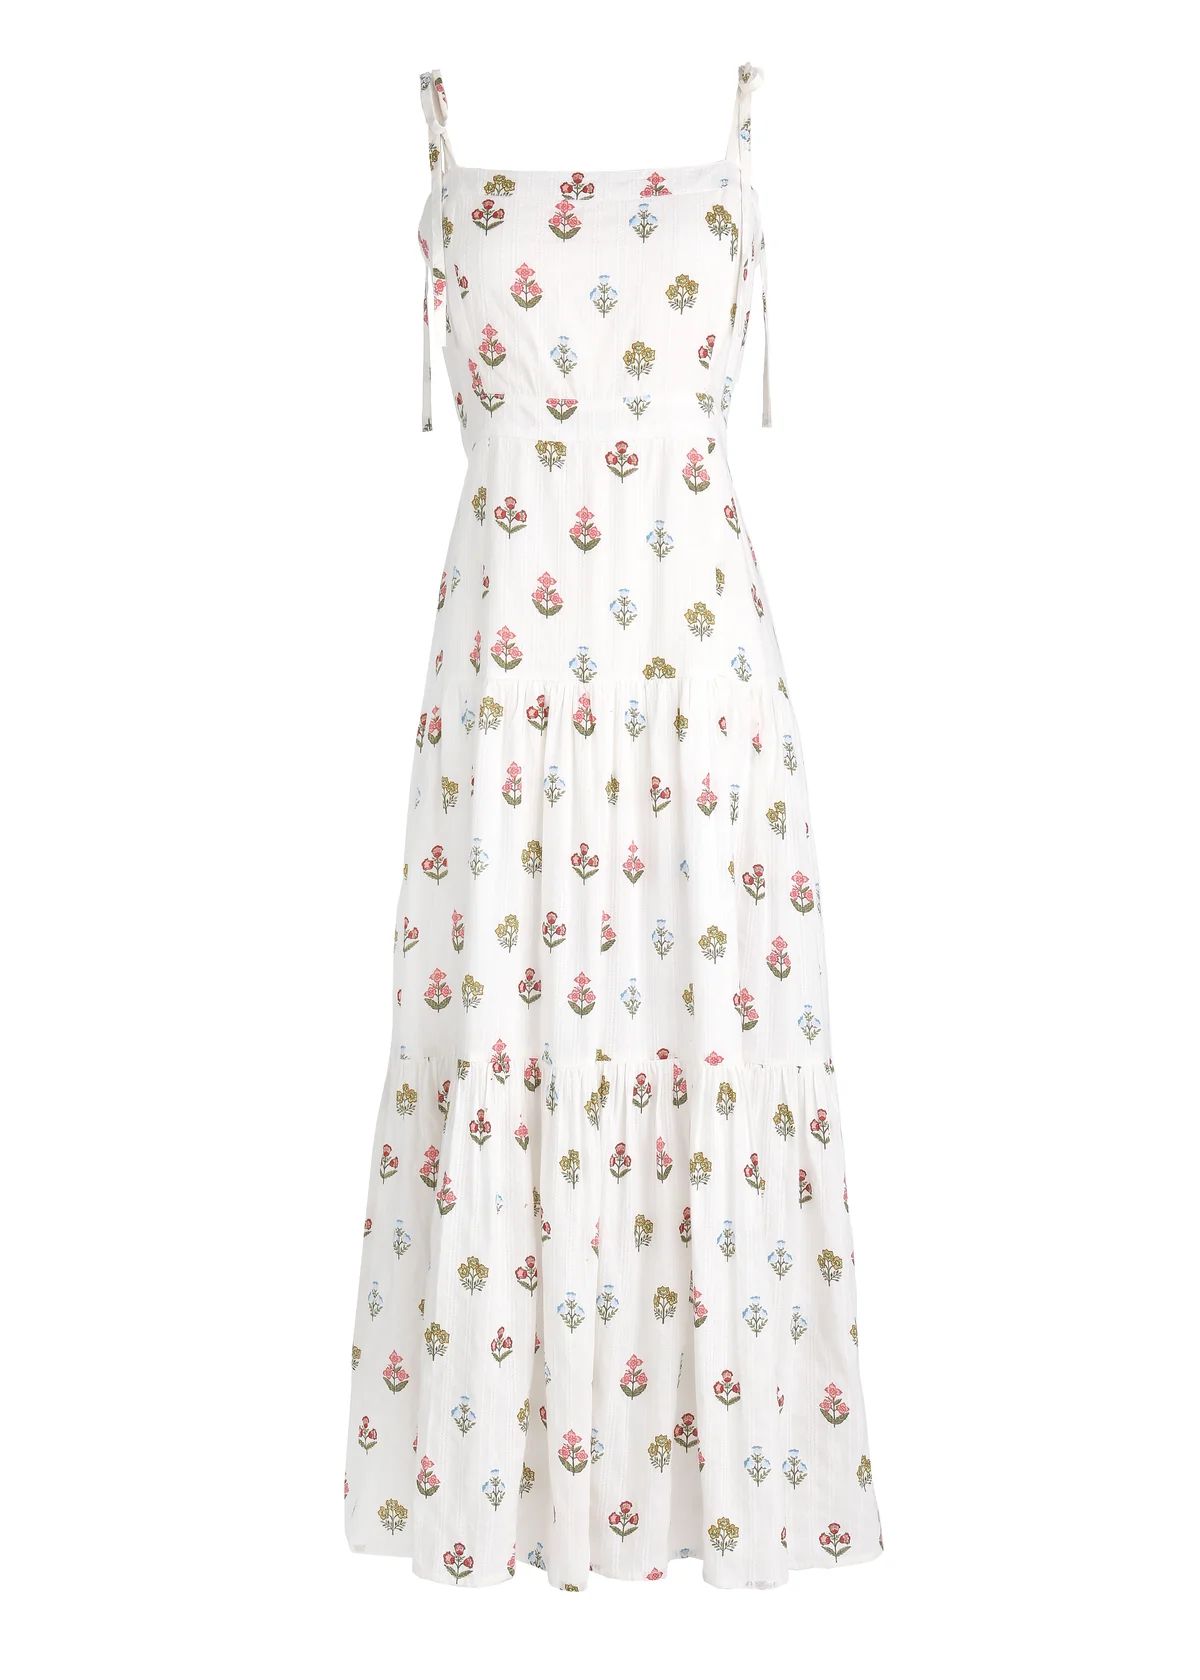 OTM Exclusive: Womens Marilyn Dress in Wildflower Floral | Over The Moon